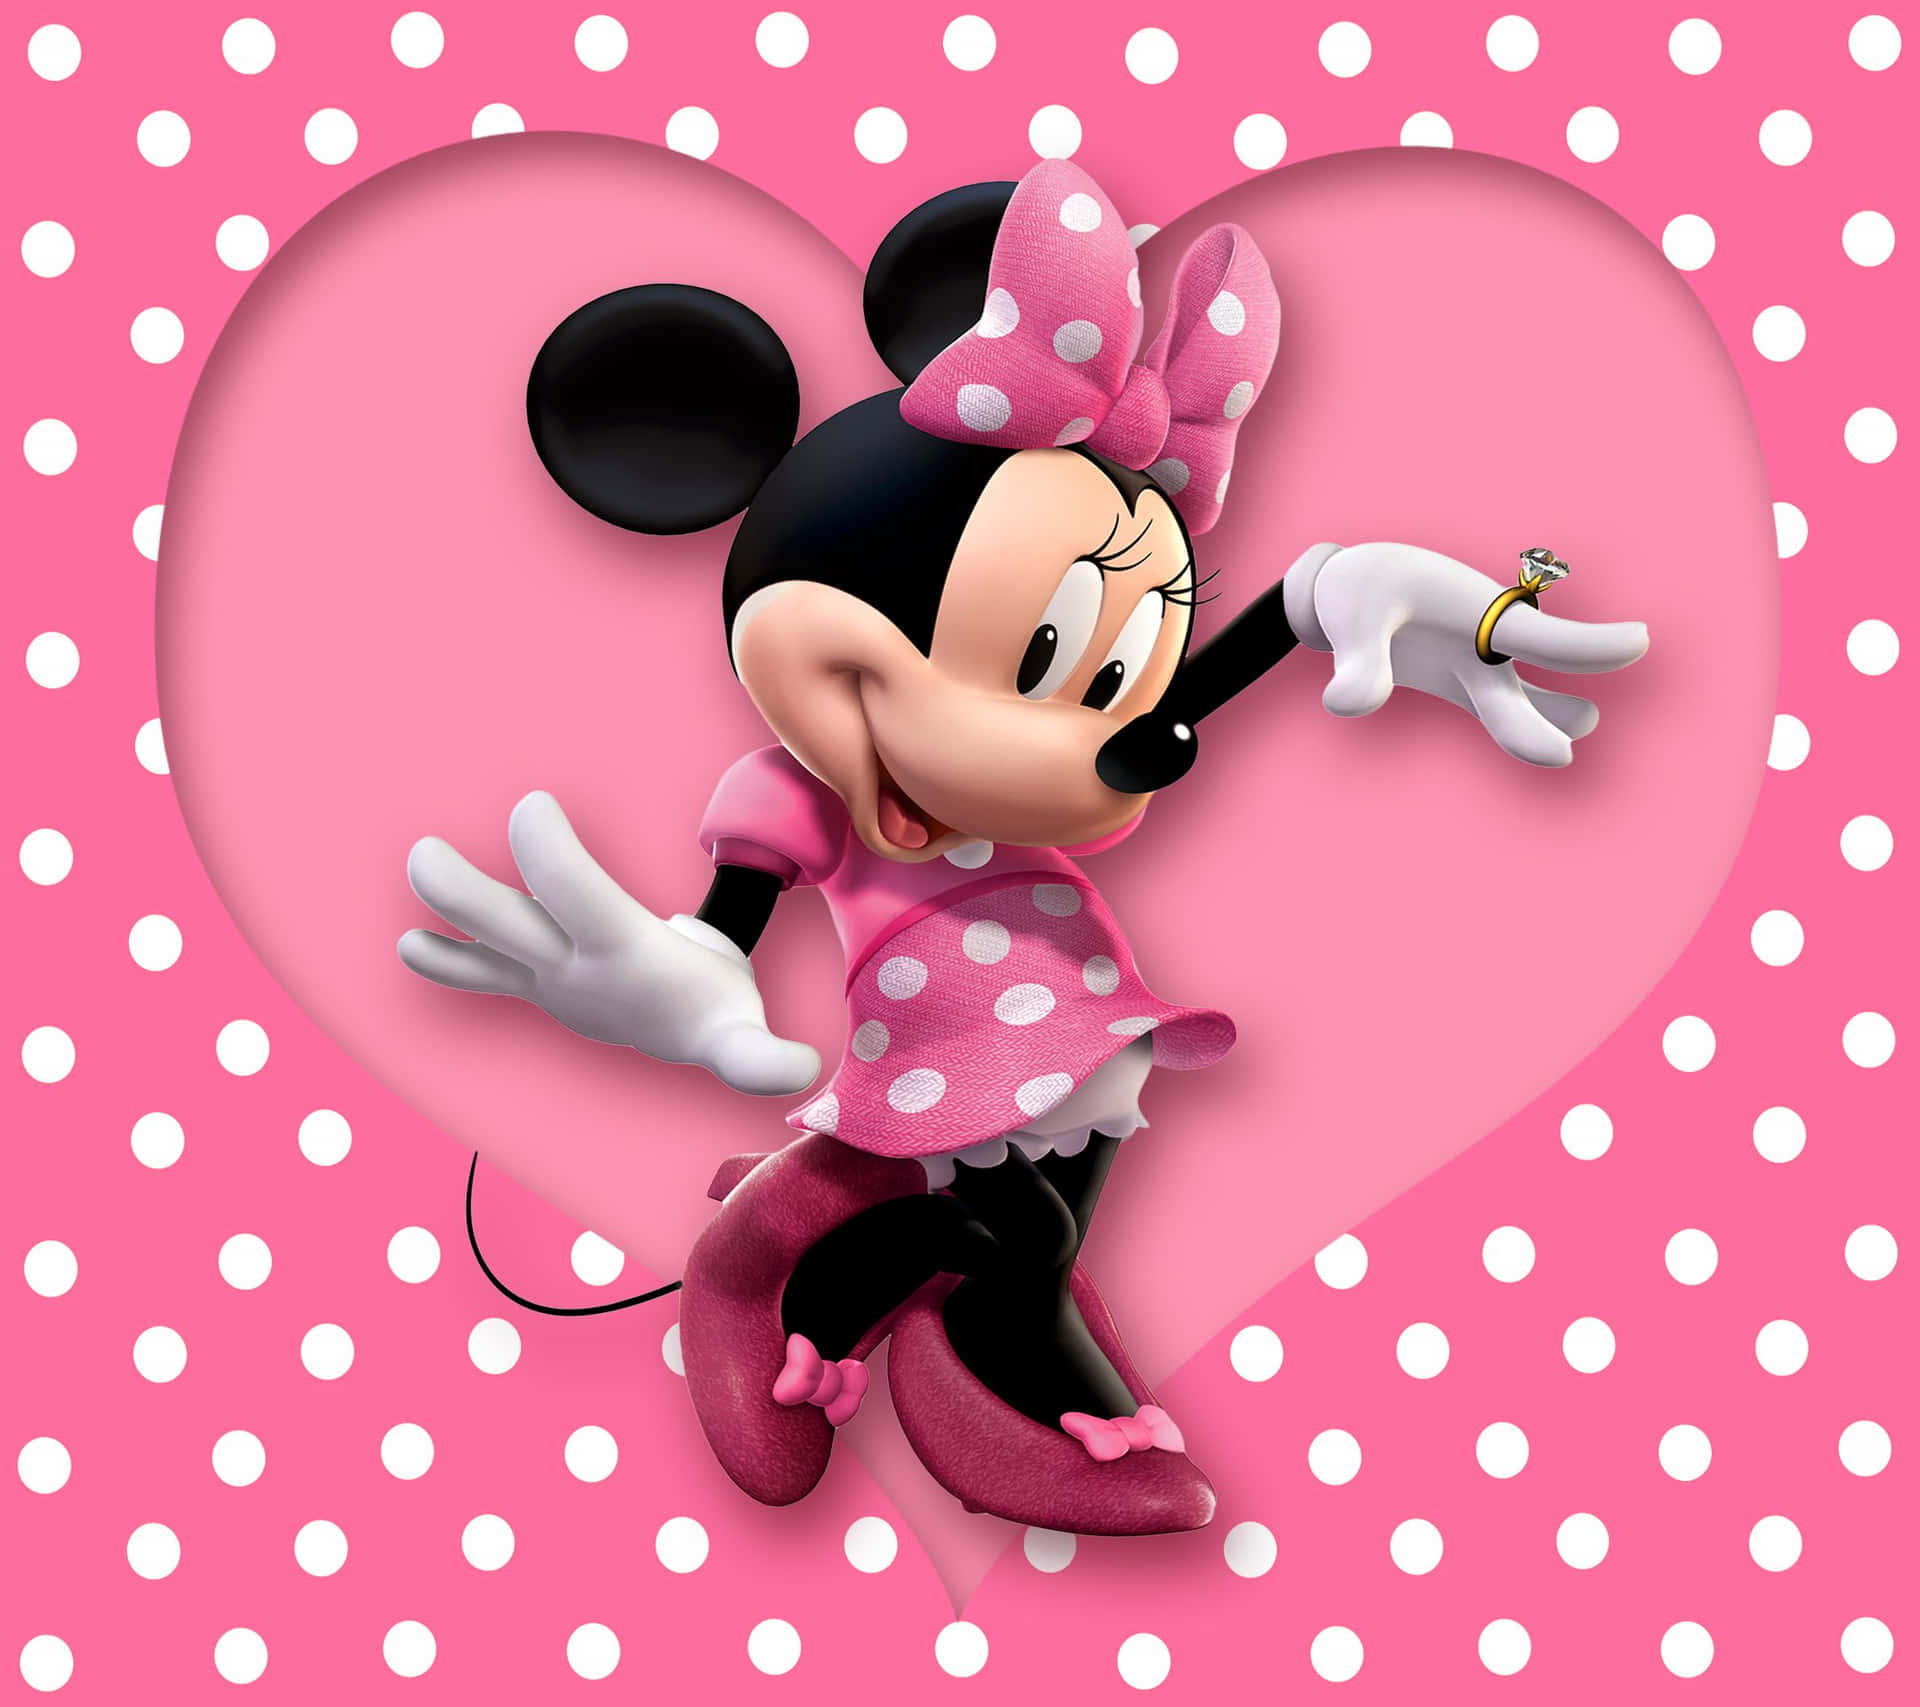 Minnie Mouse shows off her cute style in her classic pink dress. Wallpaper